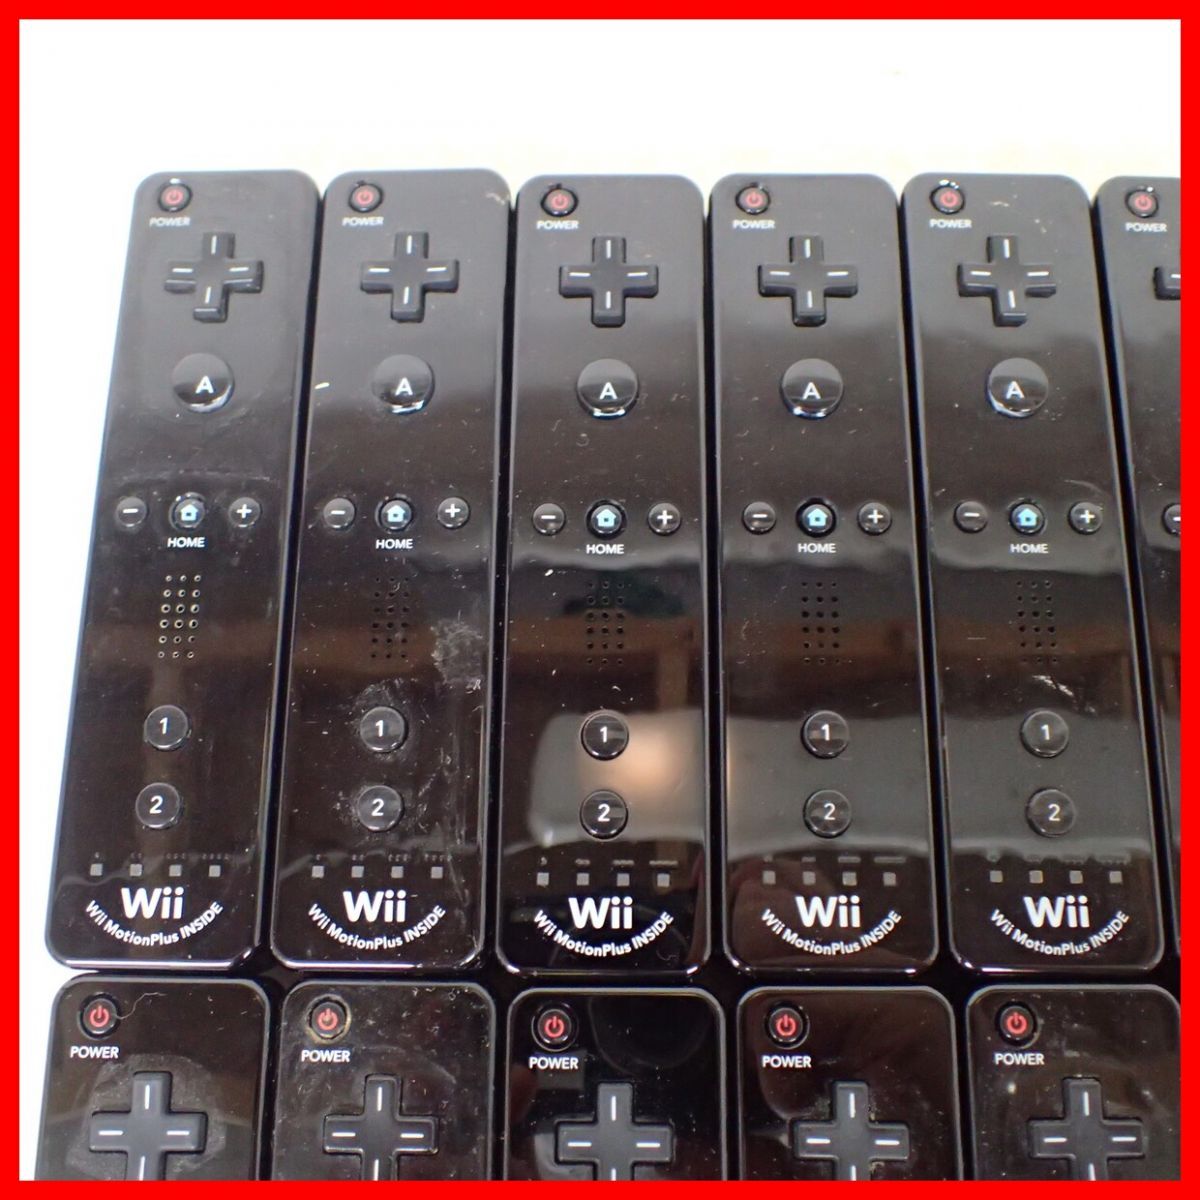 Wii controller Wii remote control plus RVL-036 black together 20 piece large amount set nintendo Nintendo silicon with cover [20